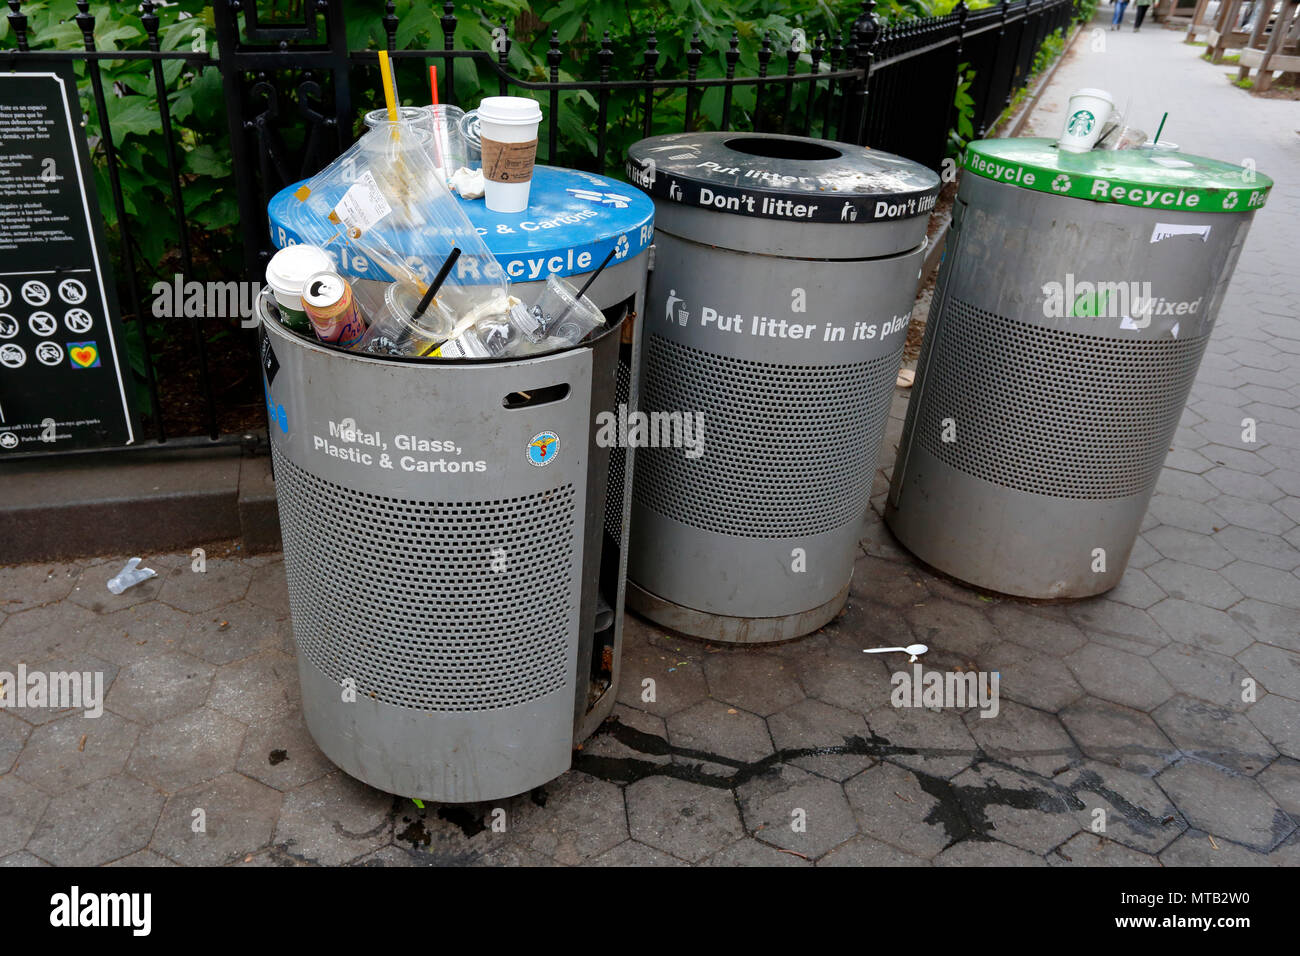 https://c8.alamy.com/comp/MTB2W0/garbage-and-mixed-recyclables-placed-in-the-wrong-color-coded-trash-bin-in-new-york-city-MTB2W0.jpg